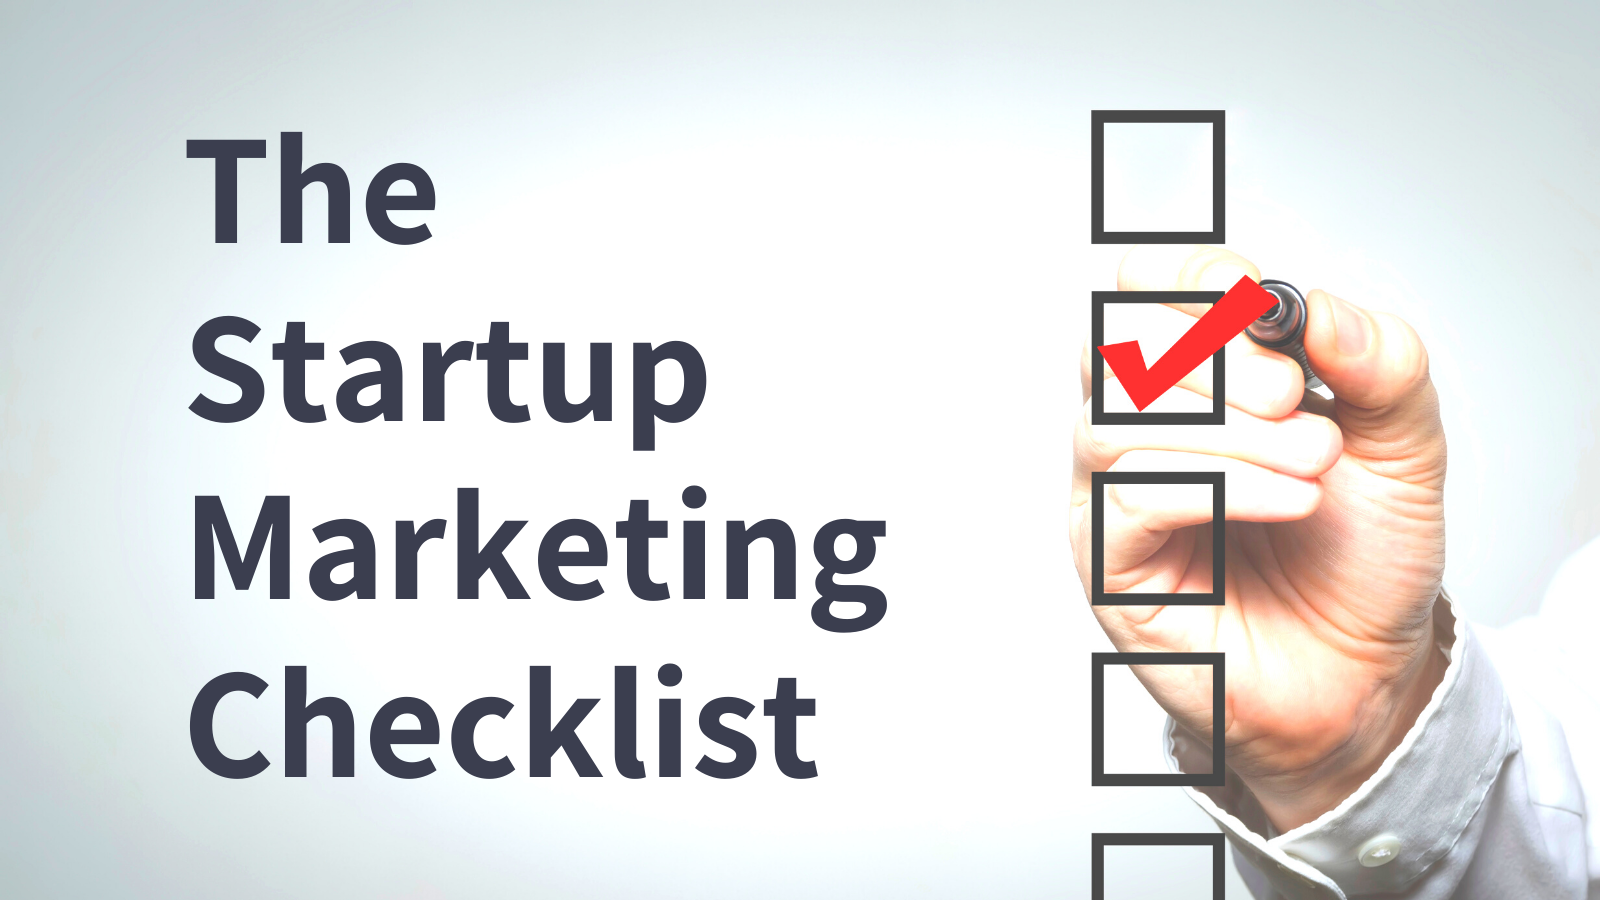 Lead image for The Startup Marketing Checklist